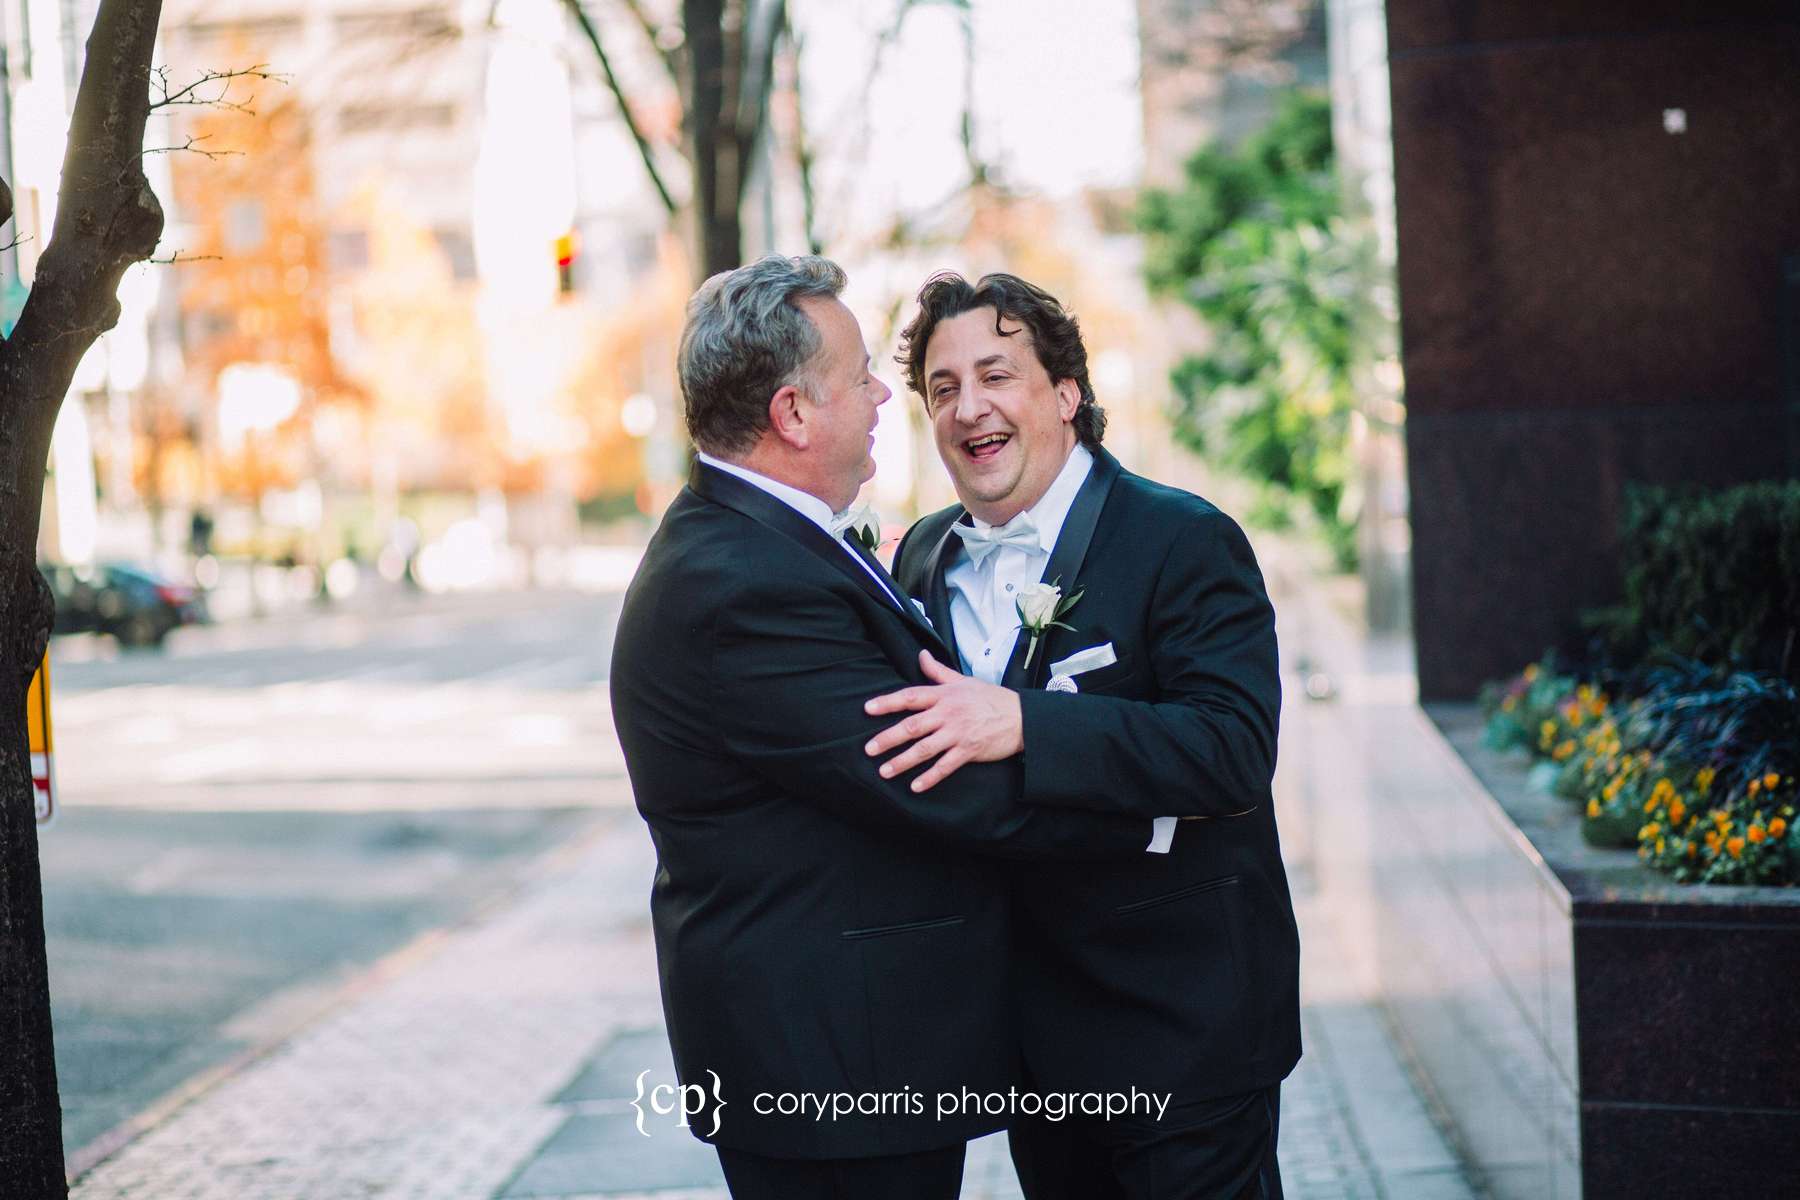 The two grooms laughing together during portraits on the streets of Seattle